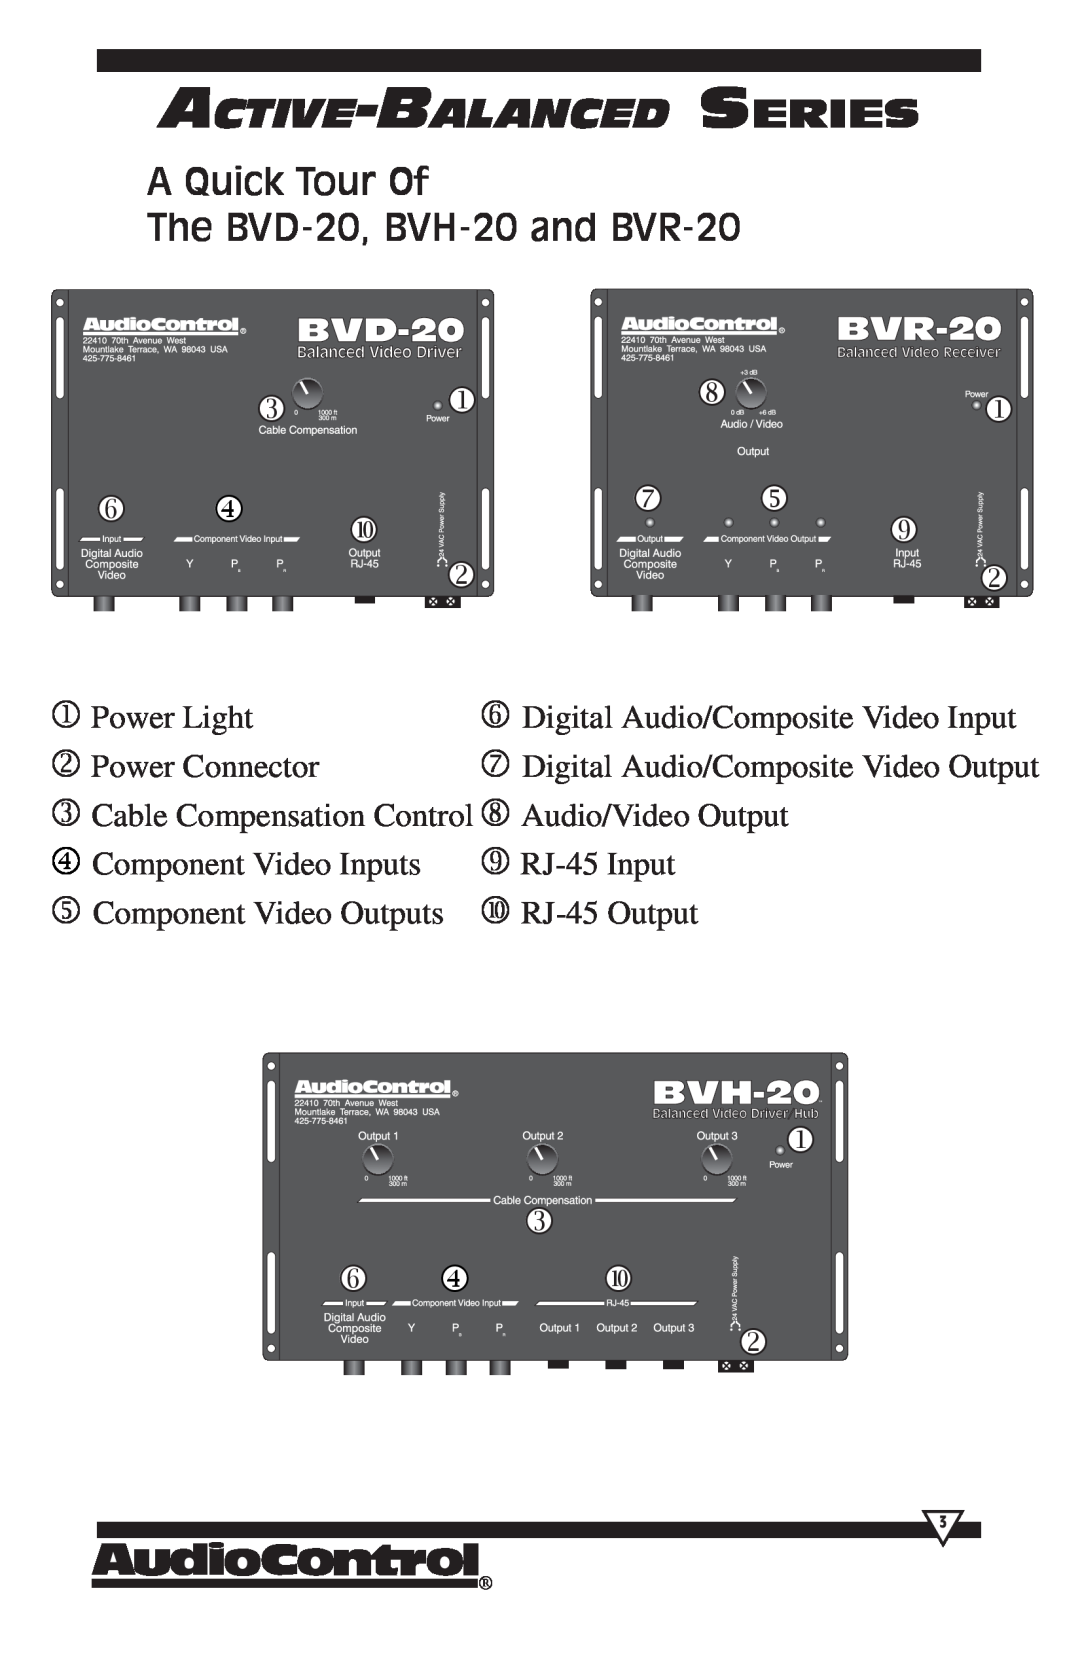 HomeTech operation manual A Quick Tour Of The BVD-20, BVH-20and BVR-20, Active-Balanced Series 